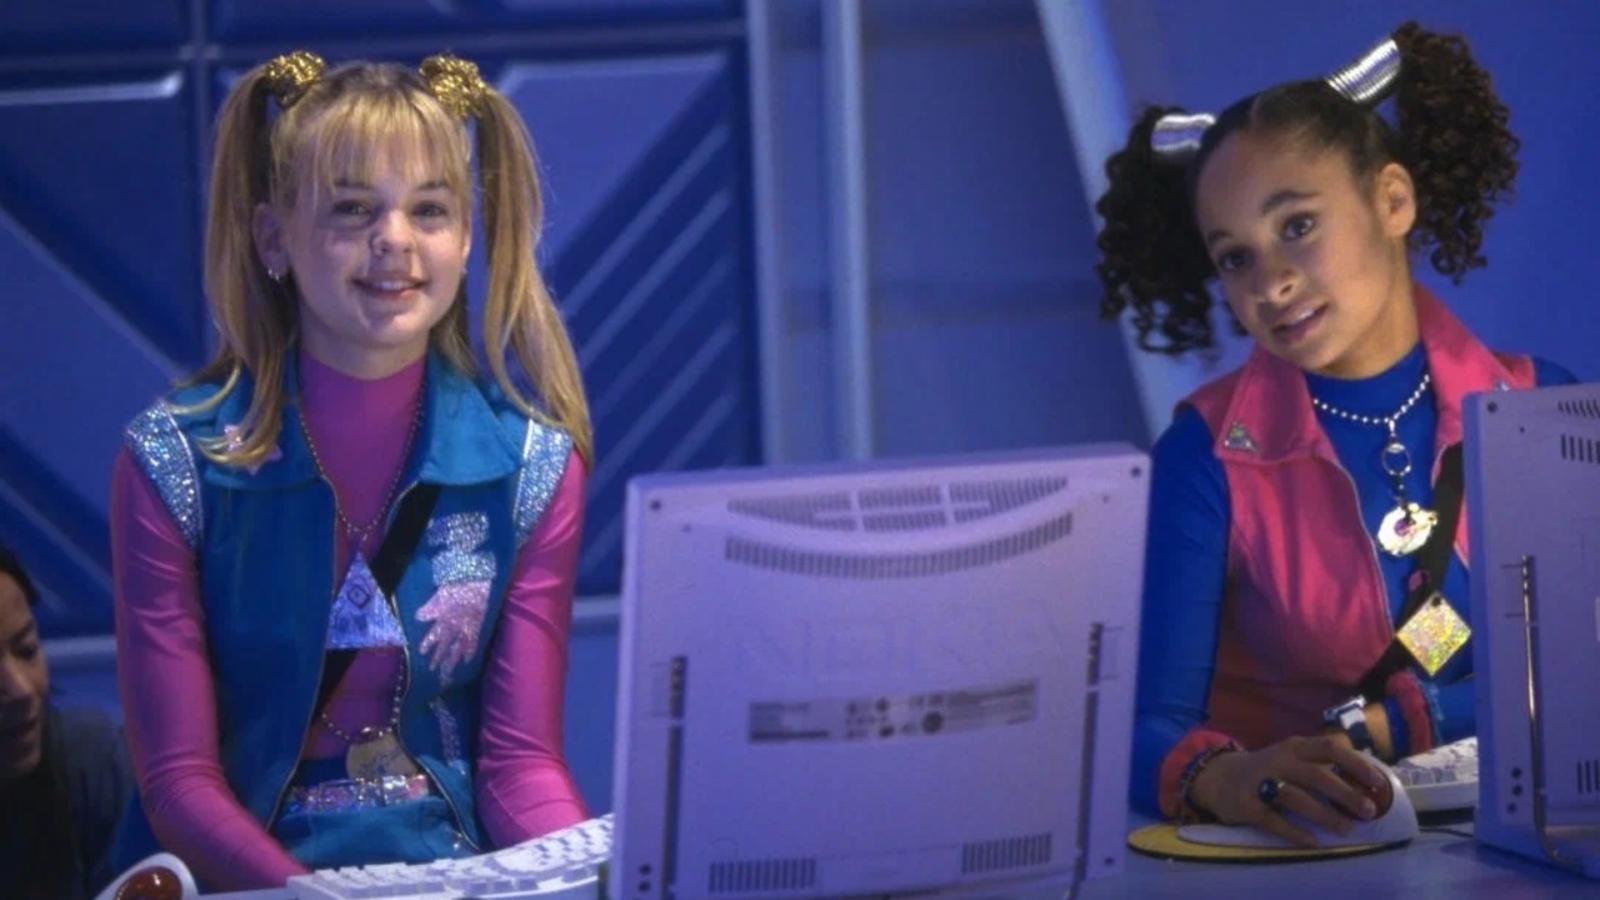 15 Wholesome Disney Channel Movies Surprisingly Watchable For Adults, Too - image 8